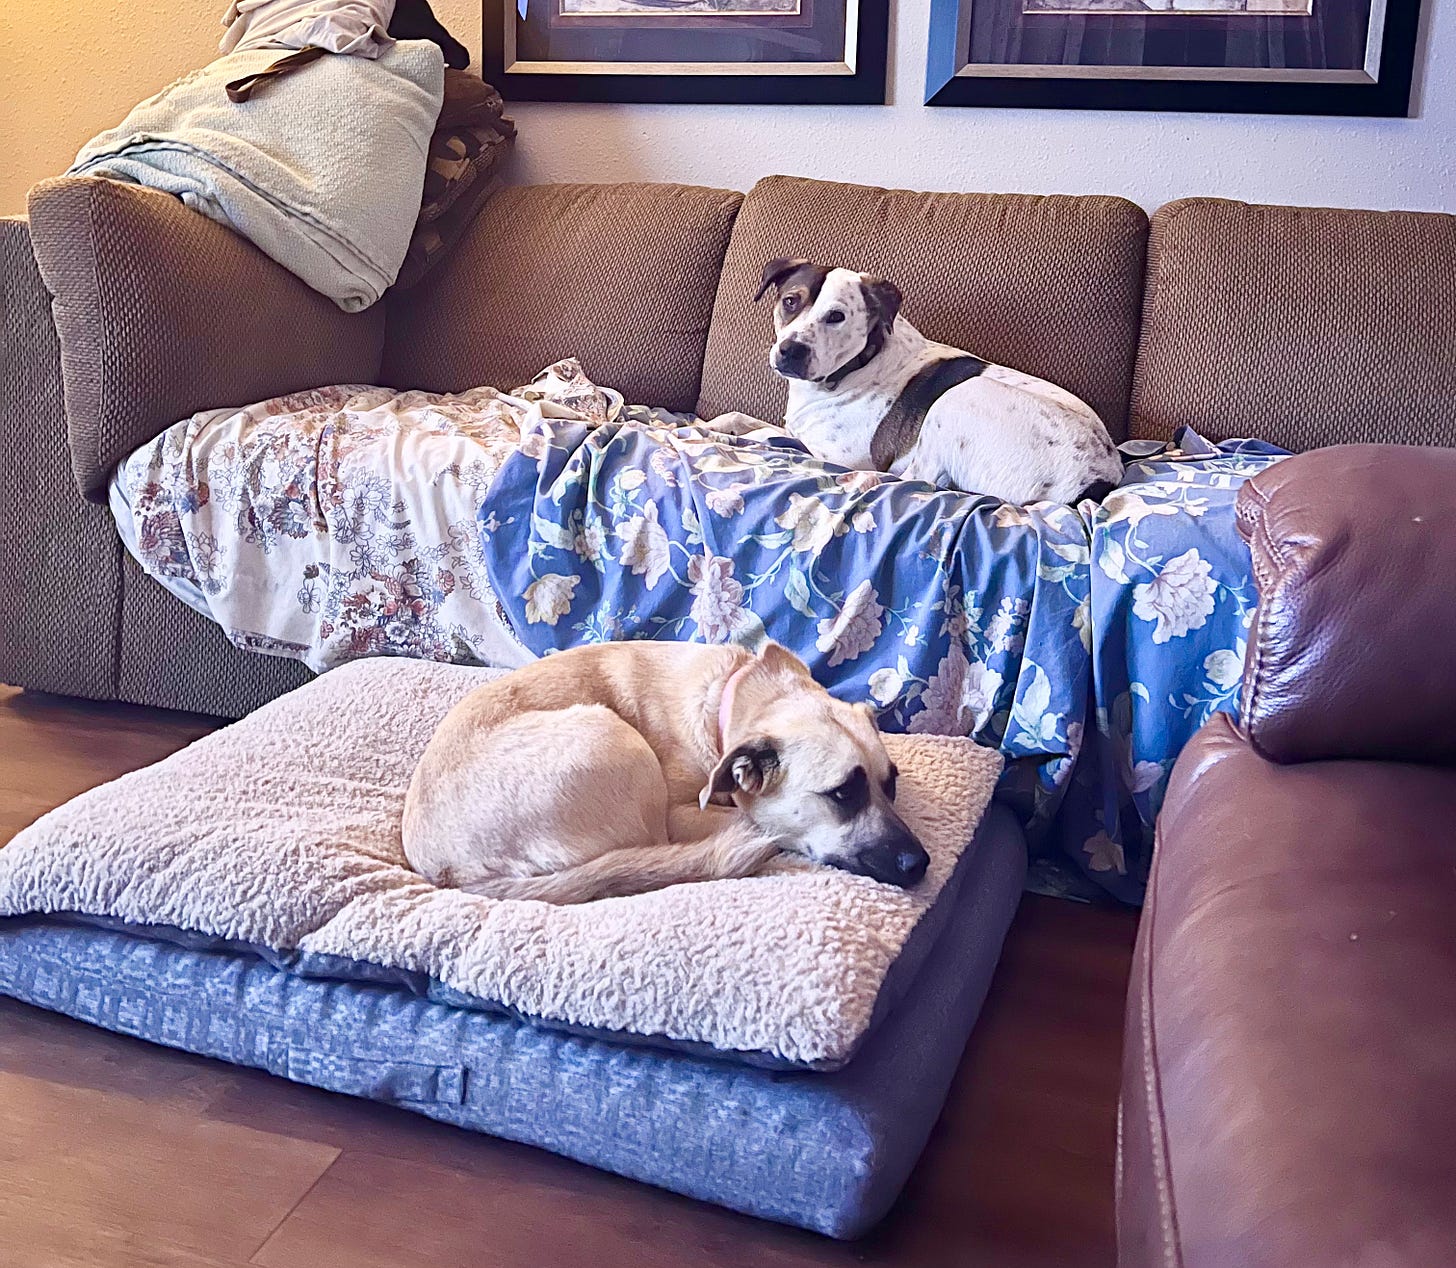 A cream colored dog (black-mouth cur mix) is curled up on a dog bed in front of a couch. The couch has sheets on it and a brown and white spotted dog (pointer mix) is laying on it. They are both medium-sized.